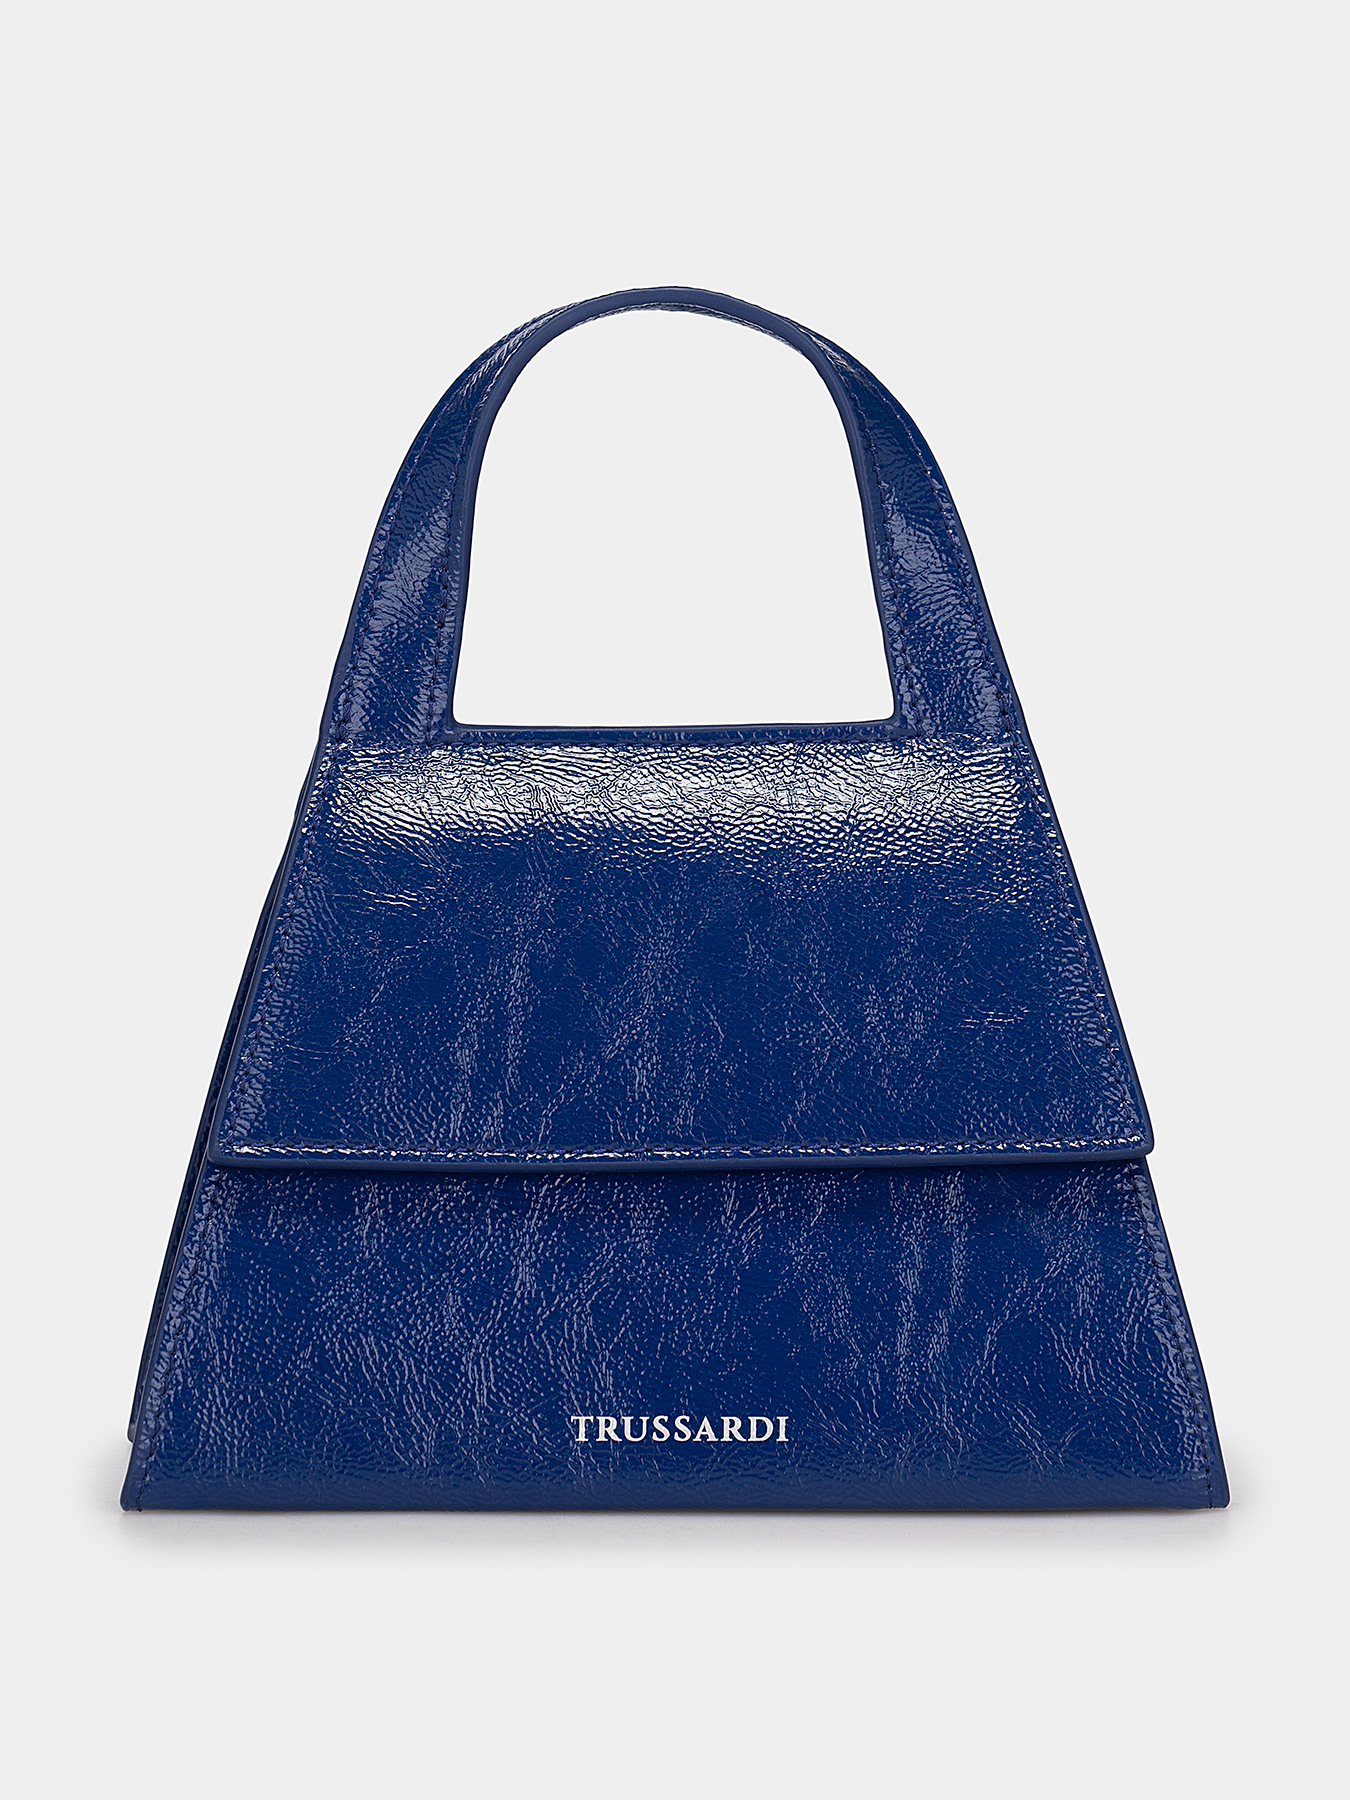 This Valda small baguette bag comes in velvety soft leather with wide  handles and silver-tone Trussardi lettering.